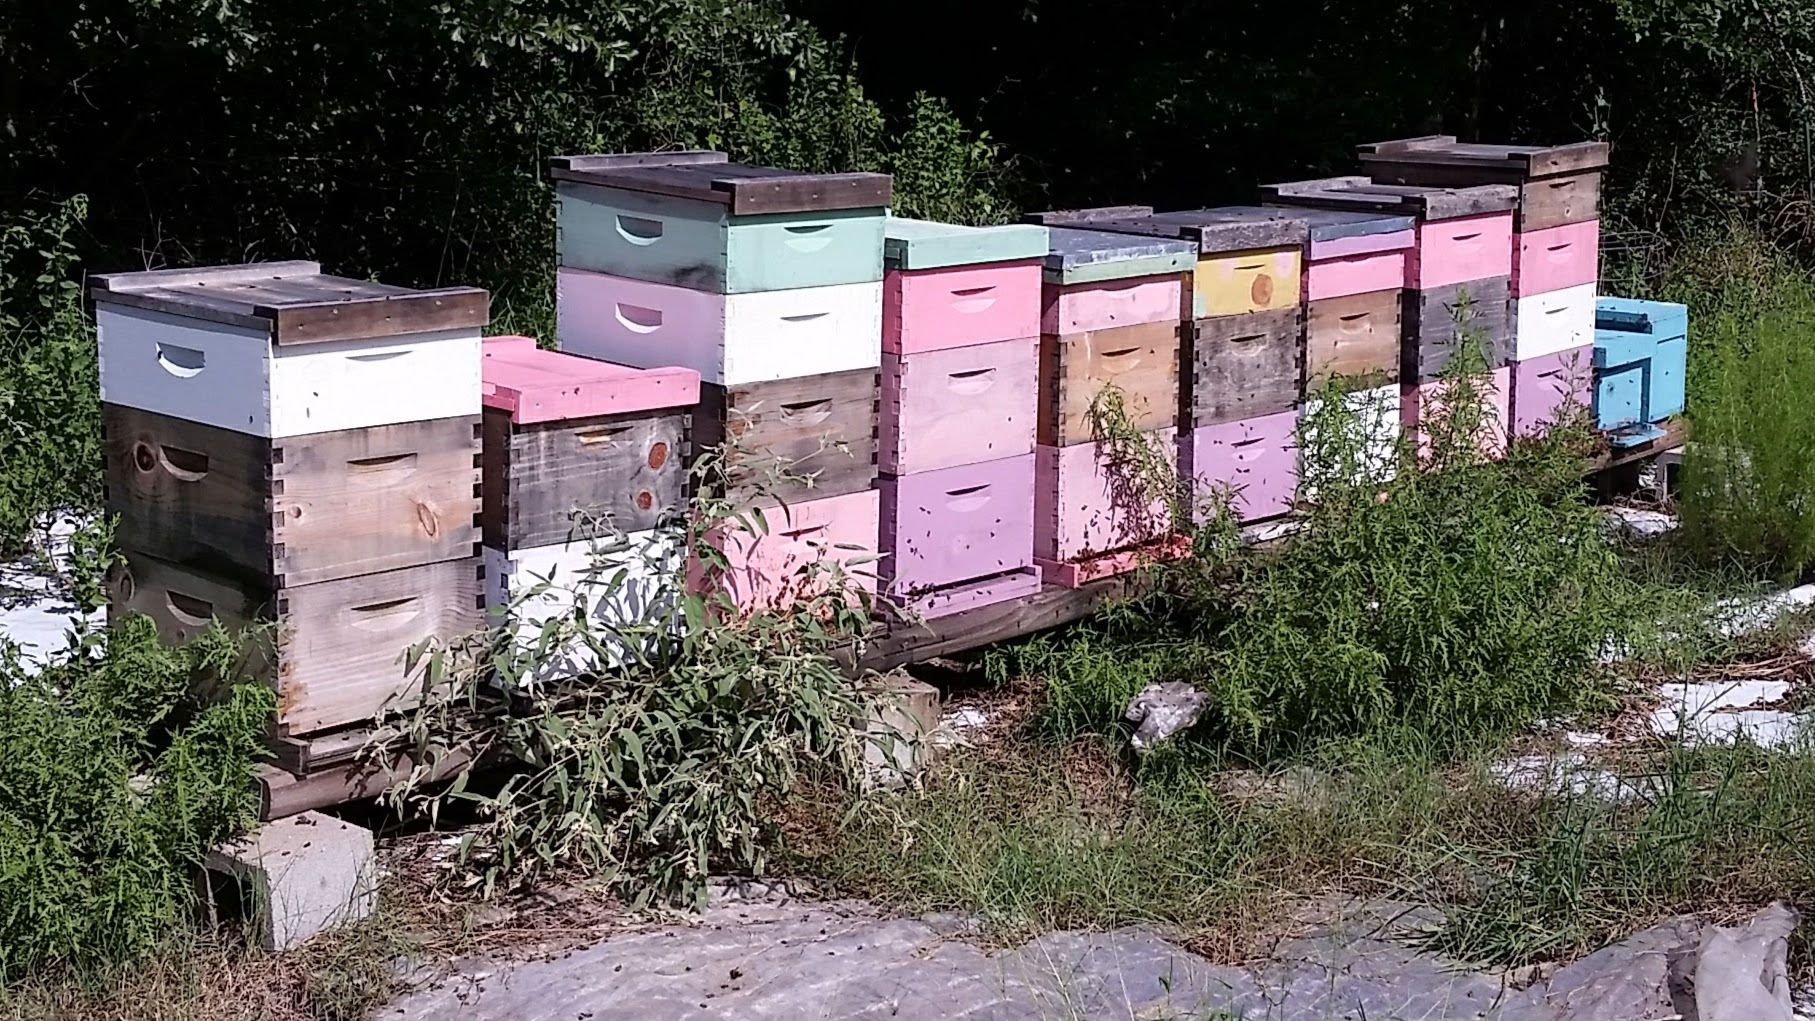 BZ Honey - Our hives in Katy are still standing after Hurricane Harvey.